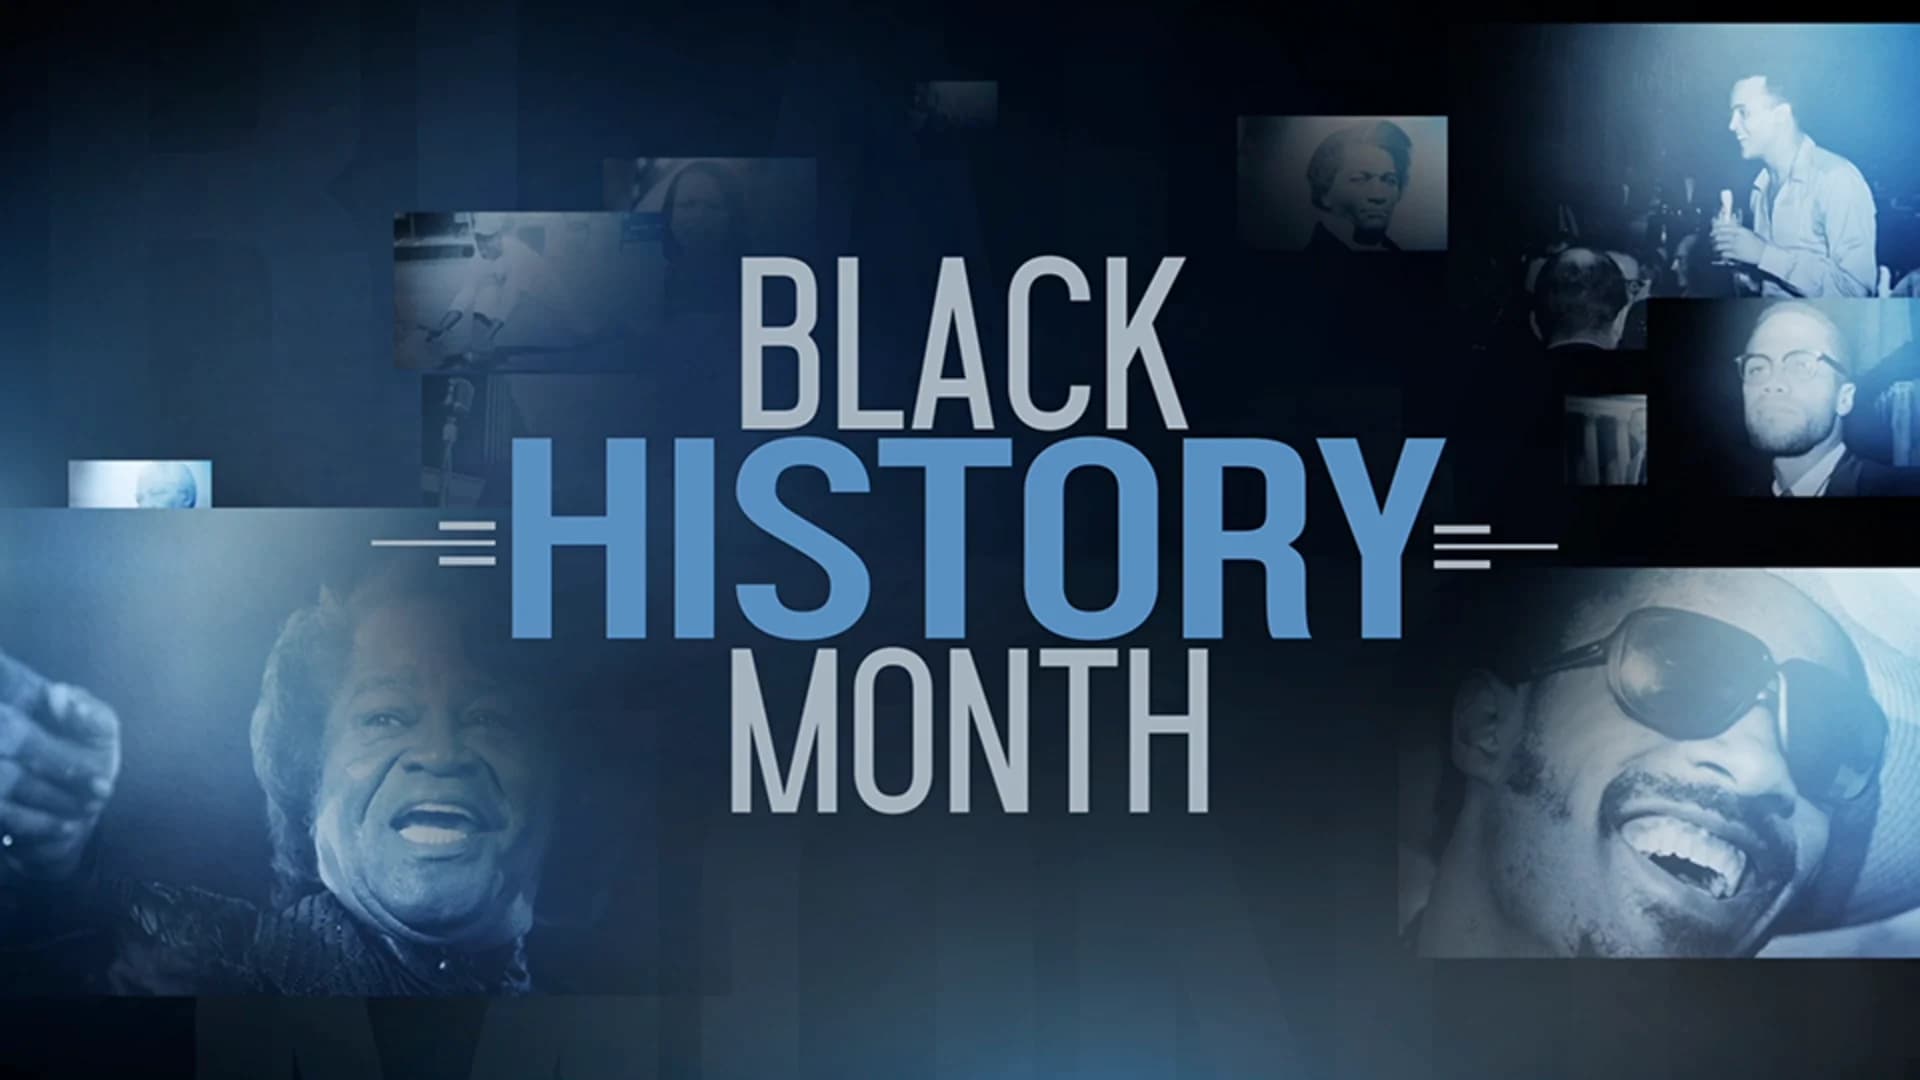 Black History Month 2018 - Series Information